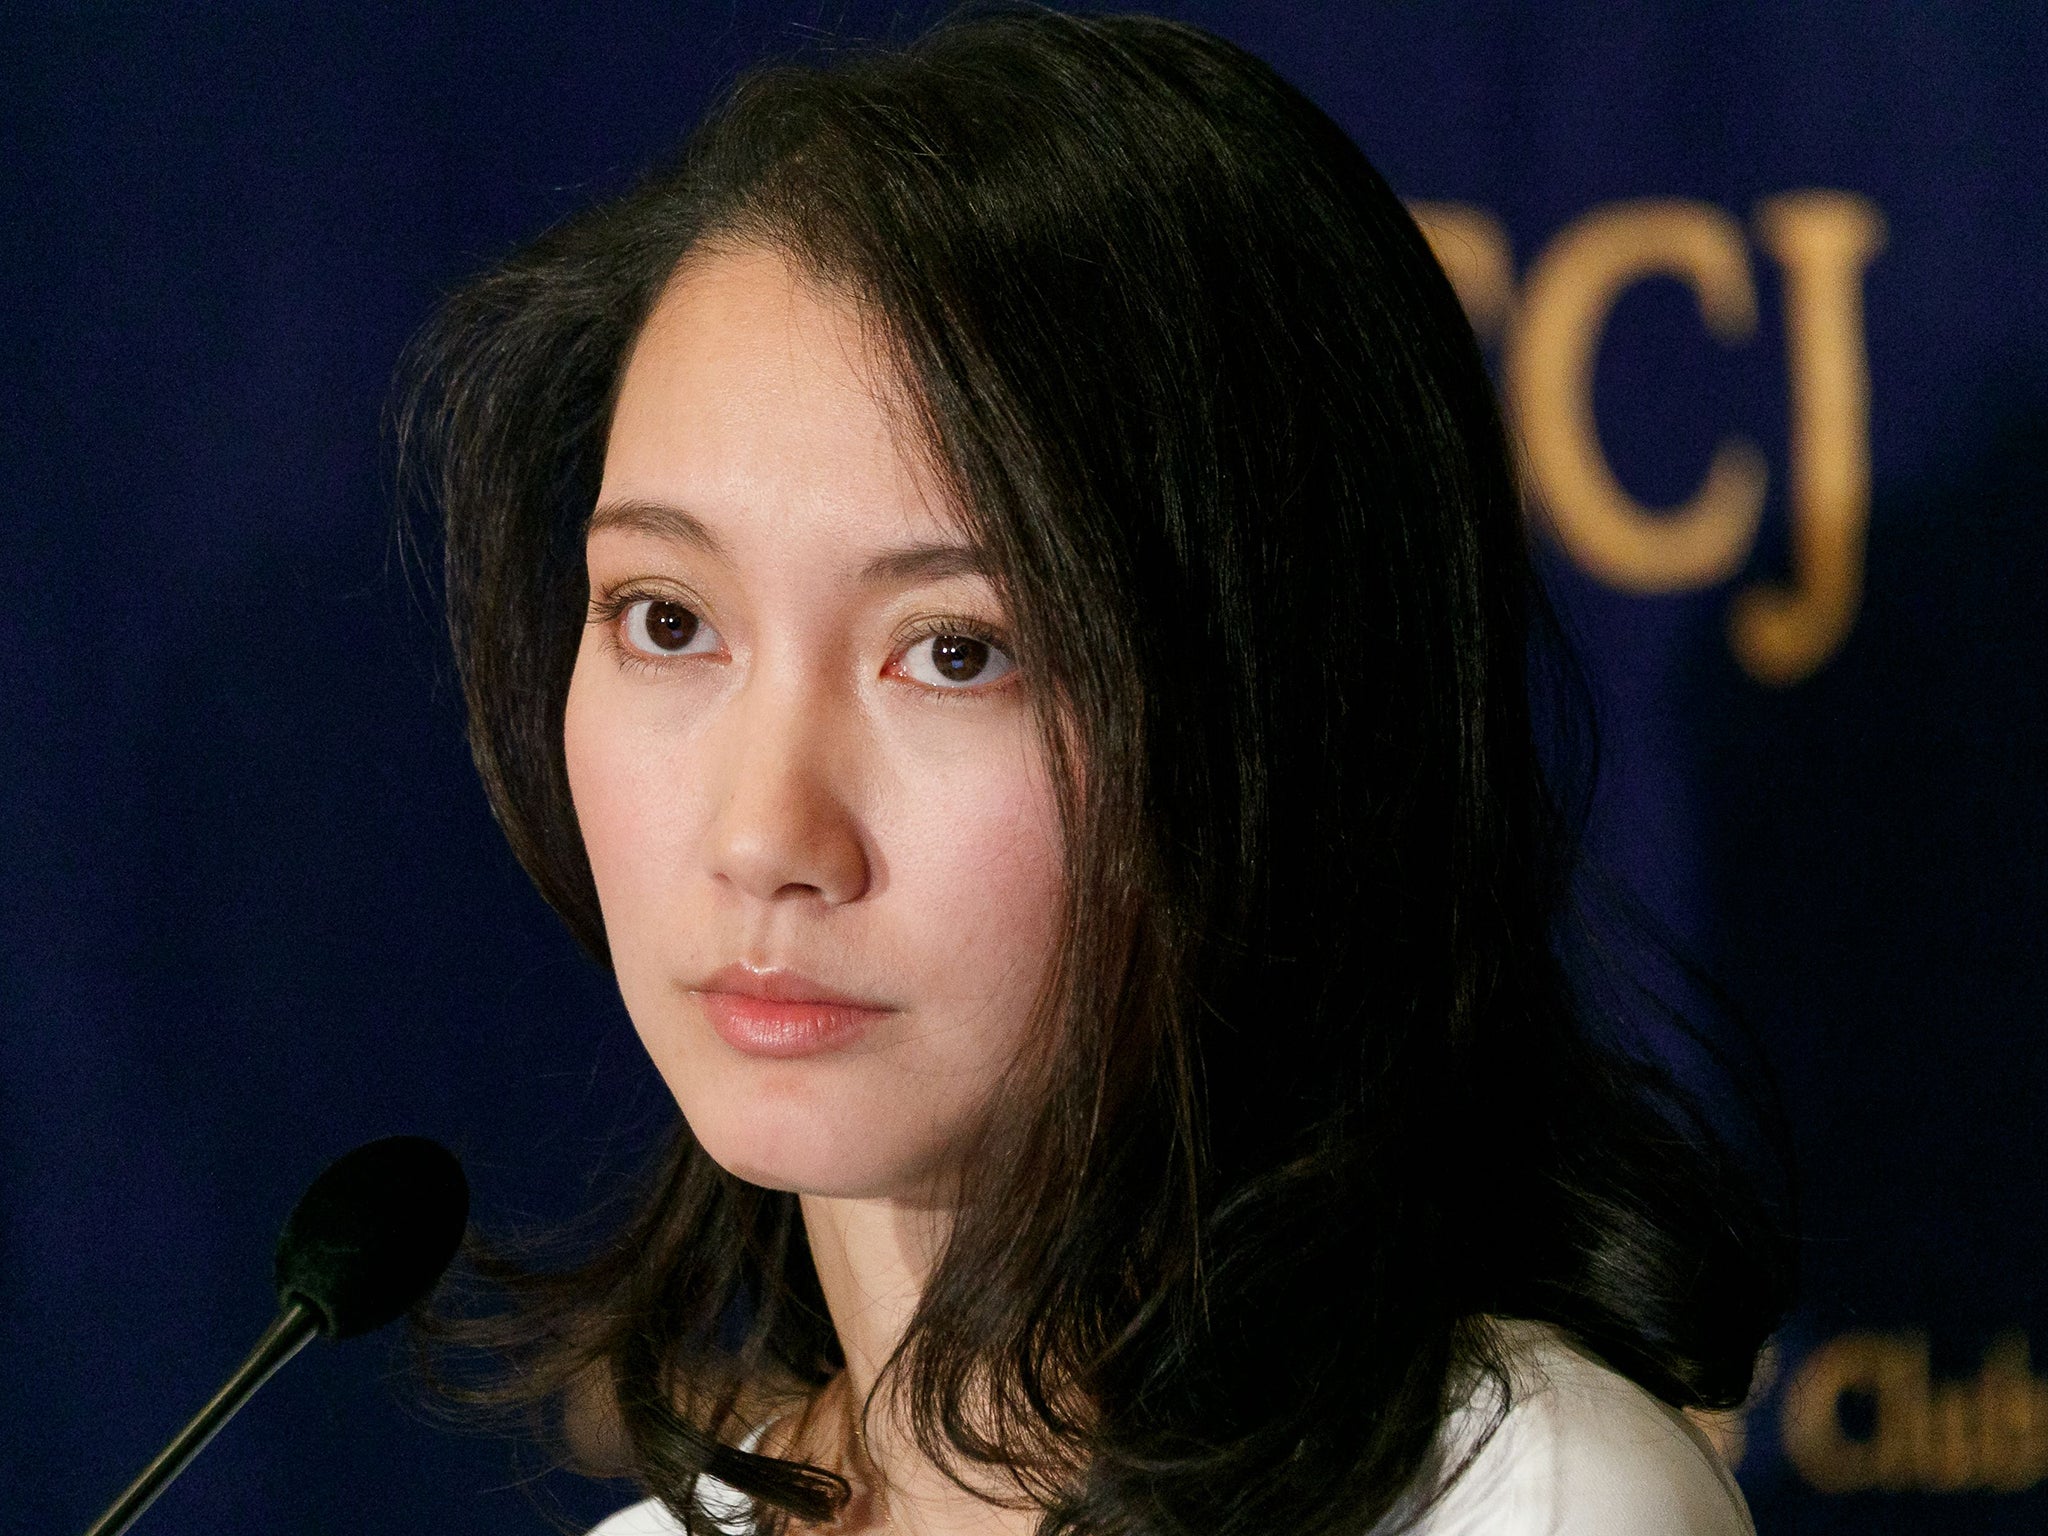 Japanese woman shatters culture of silence to pursue high-profile TV journalist accused of raping her The Independent The Independent pic